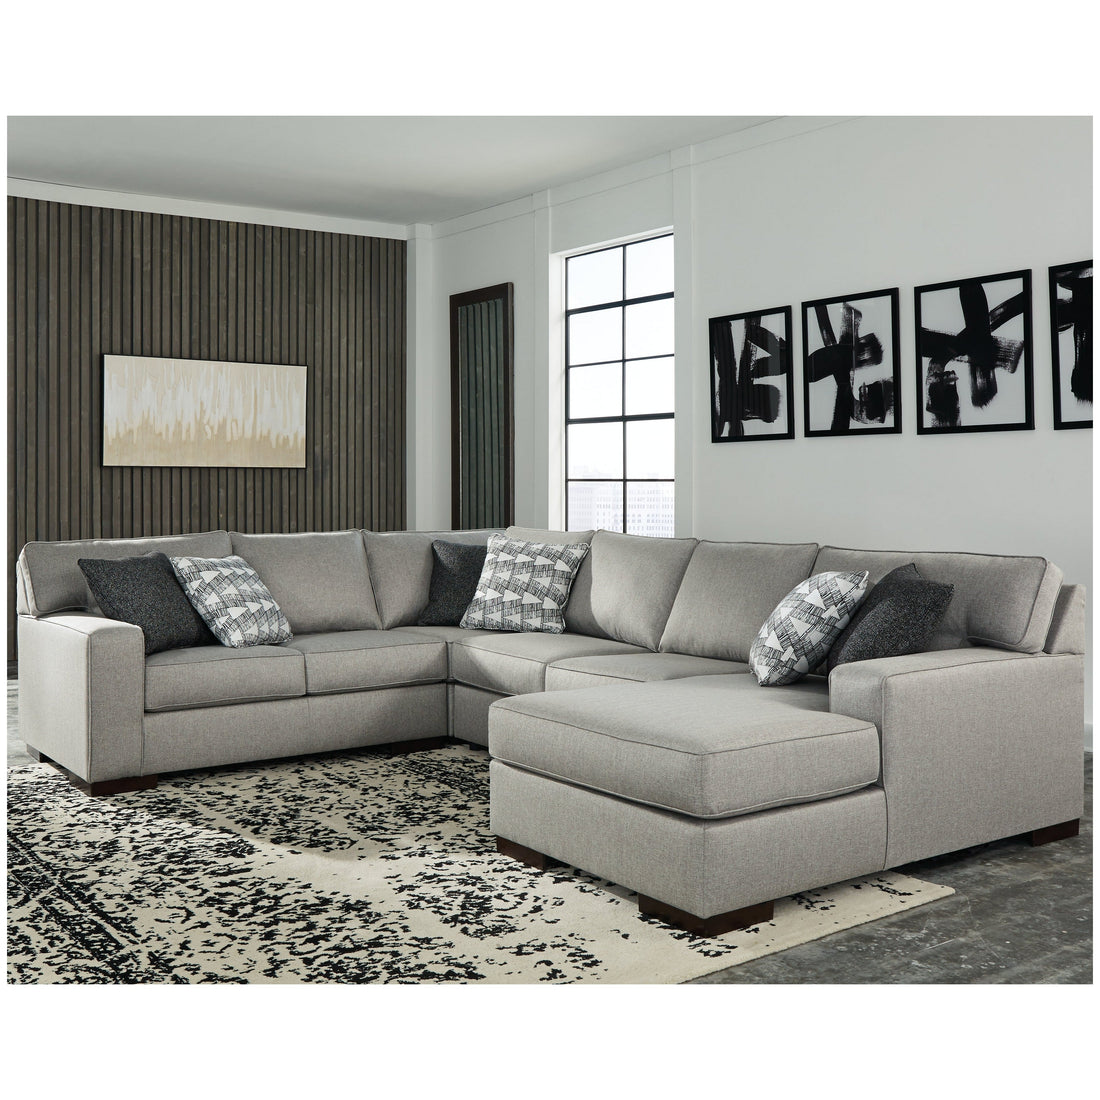 Marsing Nuvella 4-Piece Sectional with Chaise Ash-41902S4